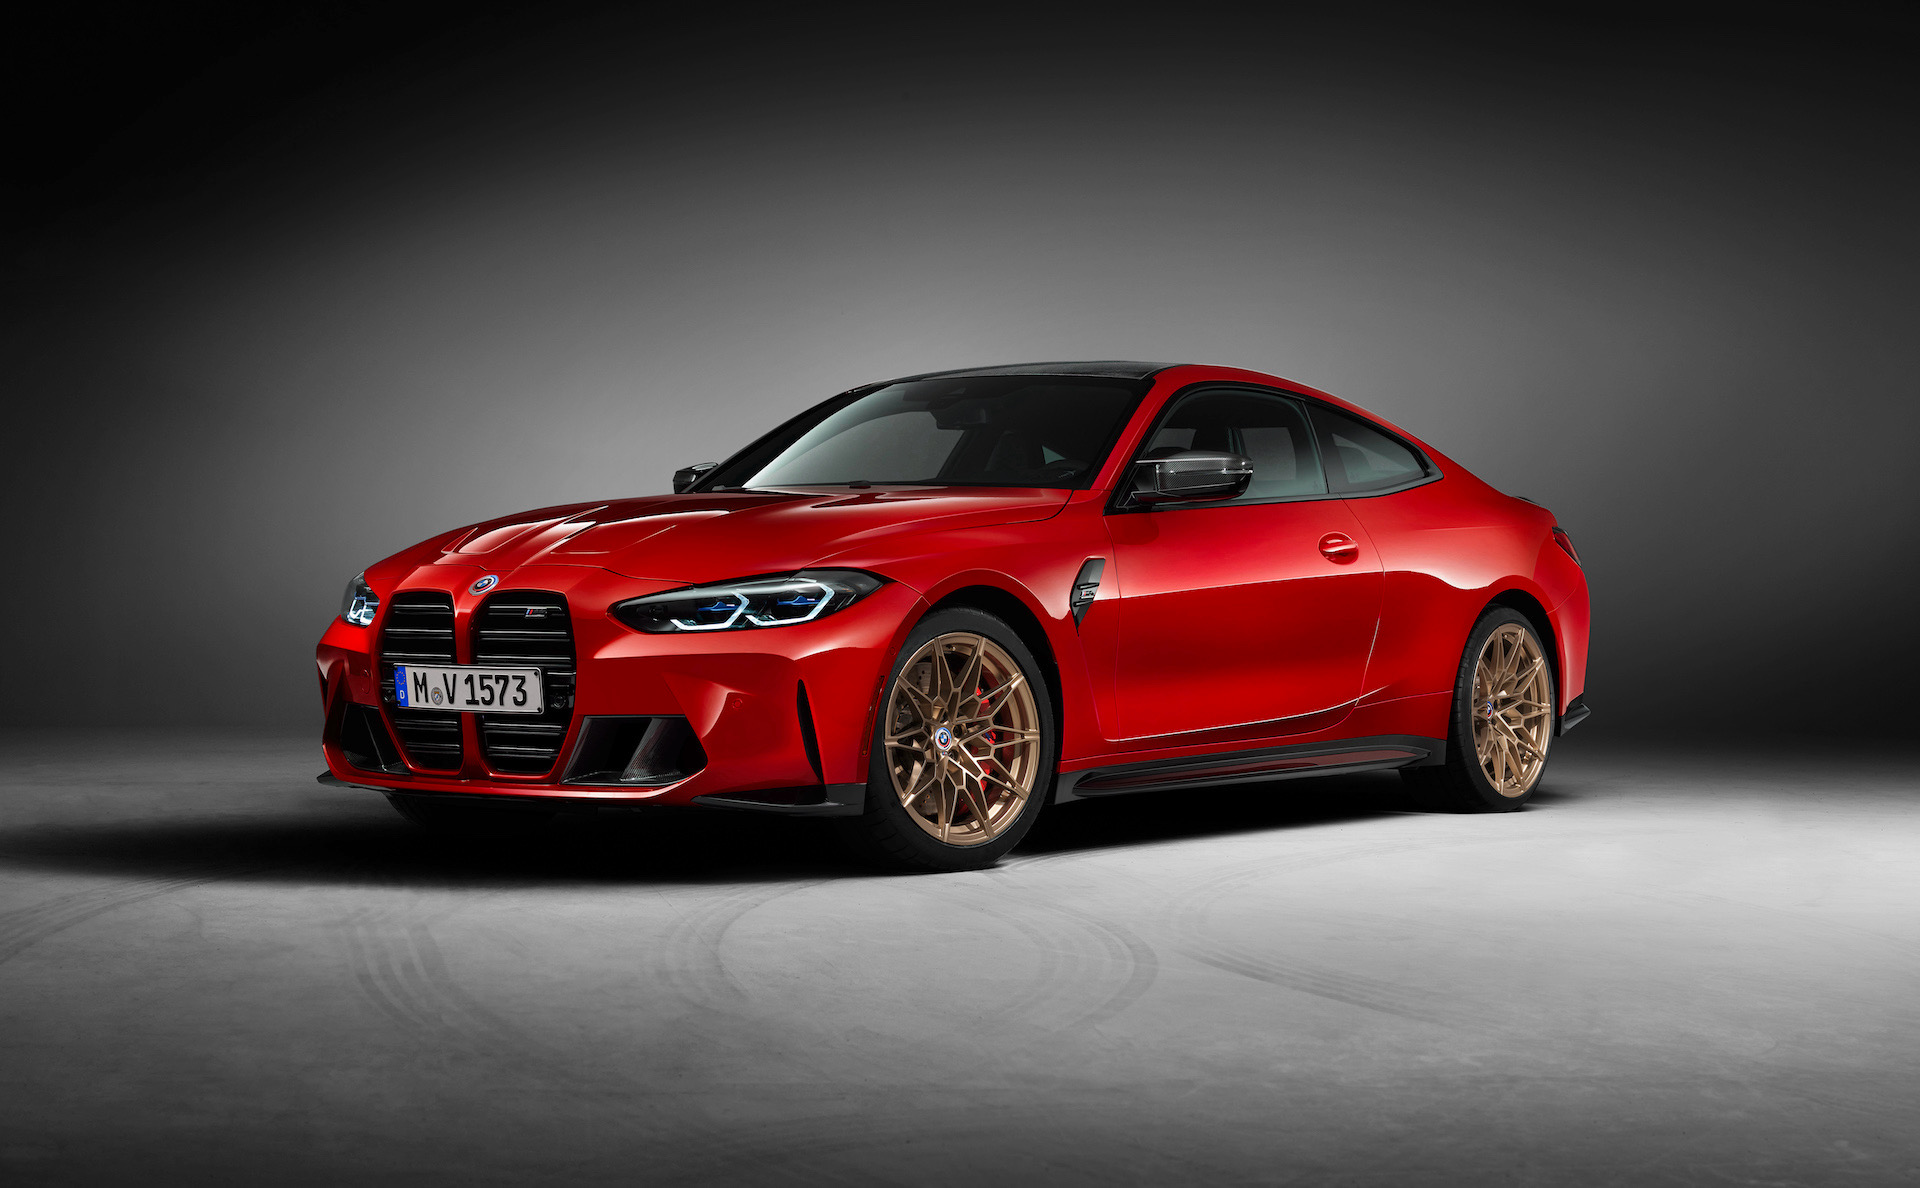 BMW reveals M3 and M4 Edition 50 Jahre specials for 50th anniversary